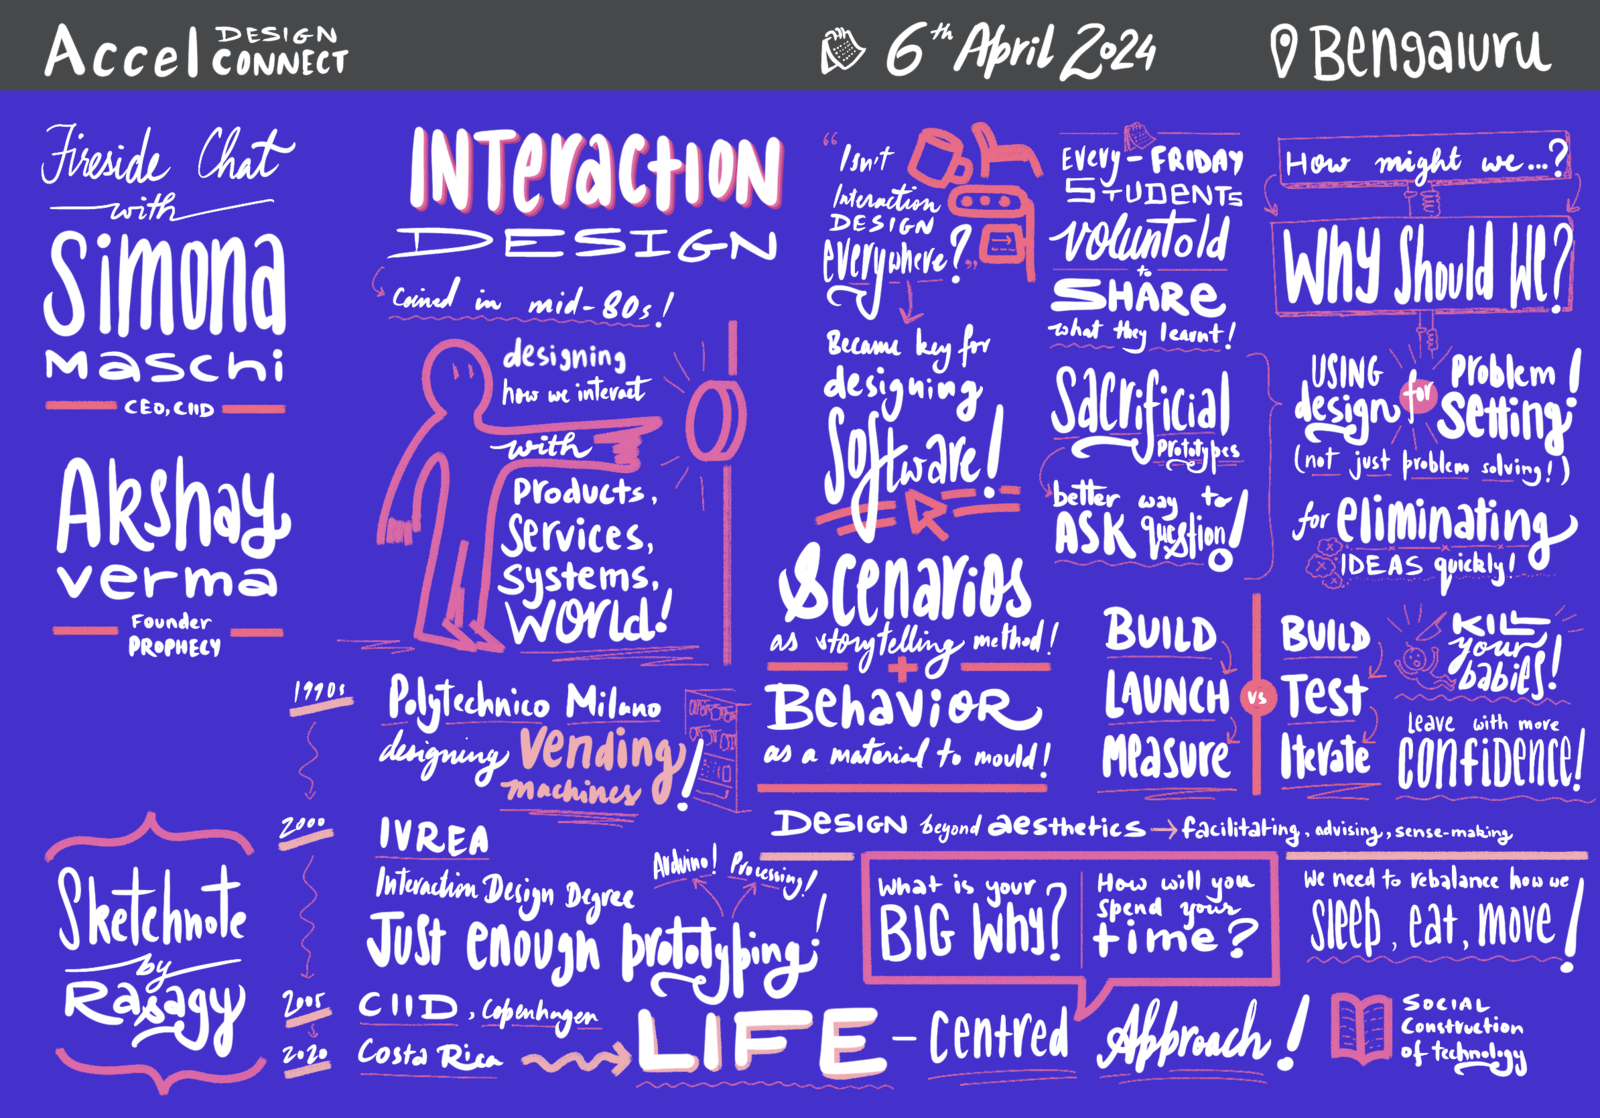 Sketchnote of Fireside Chat with Simona Maschi (CIID)